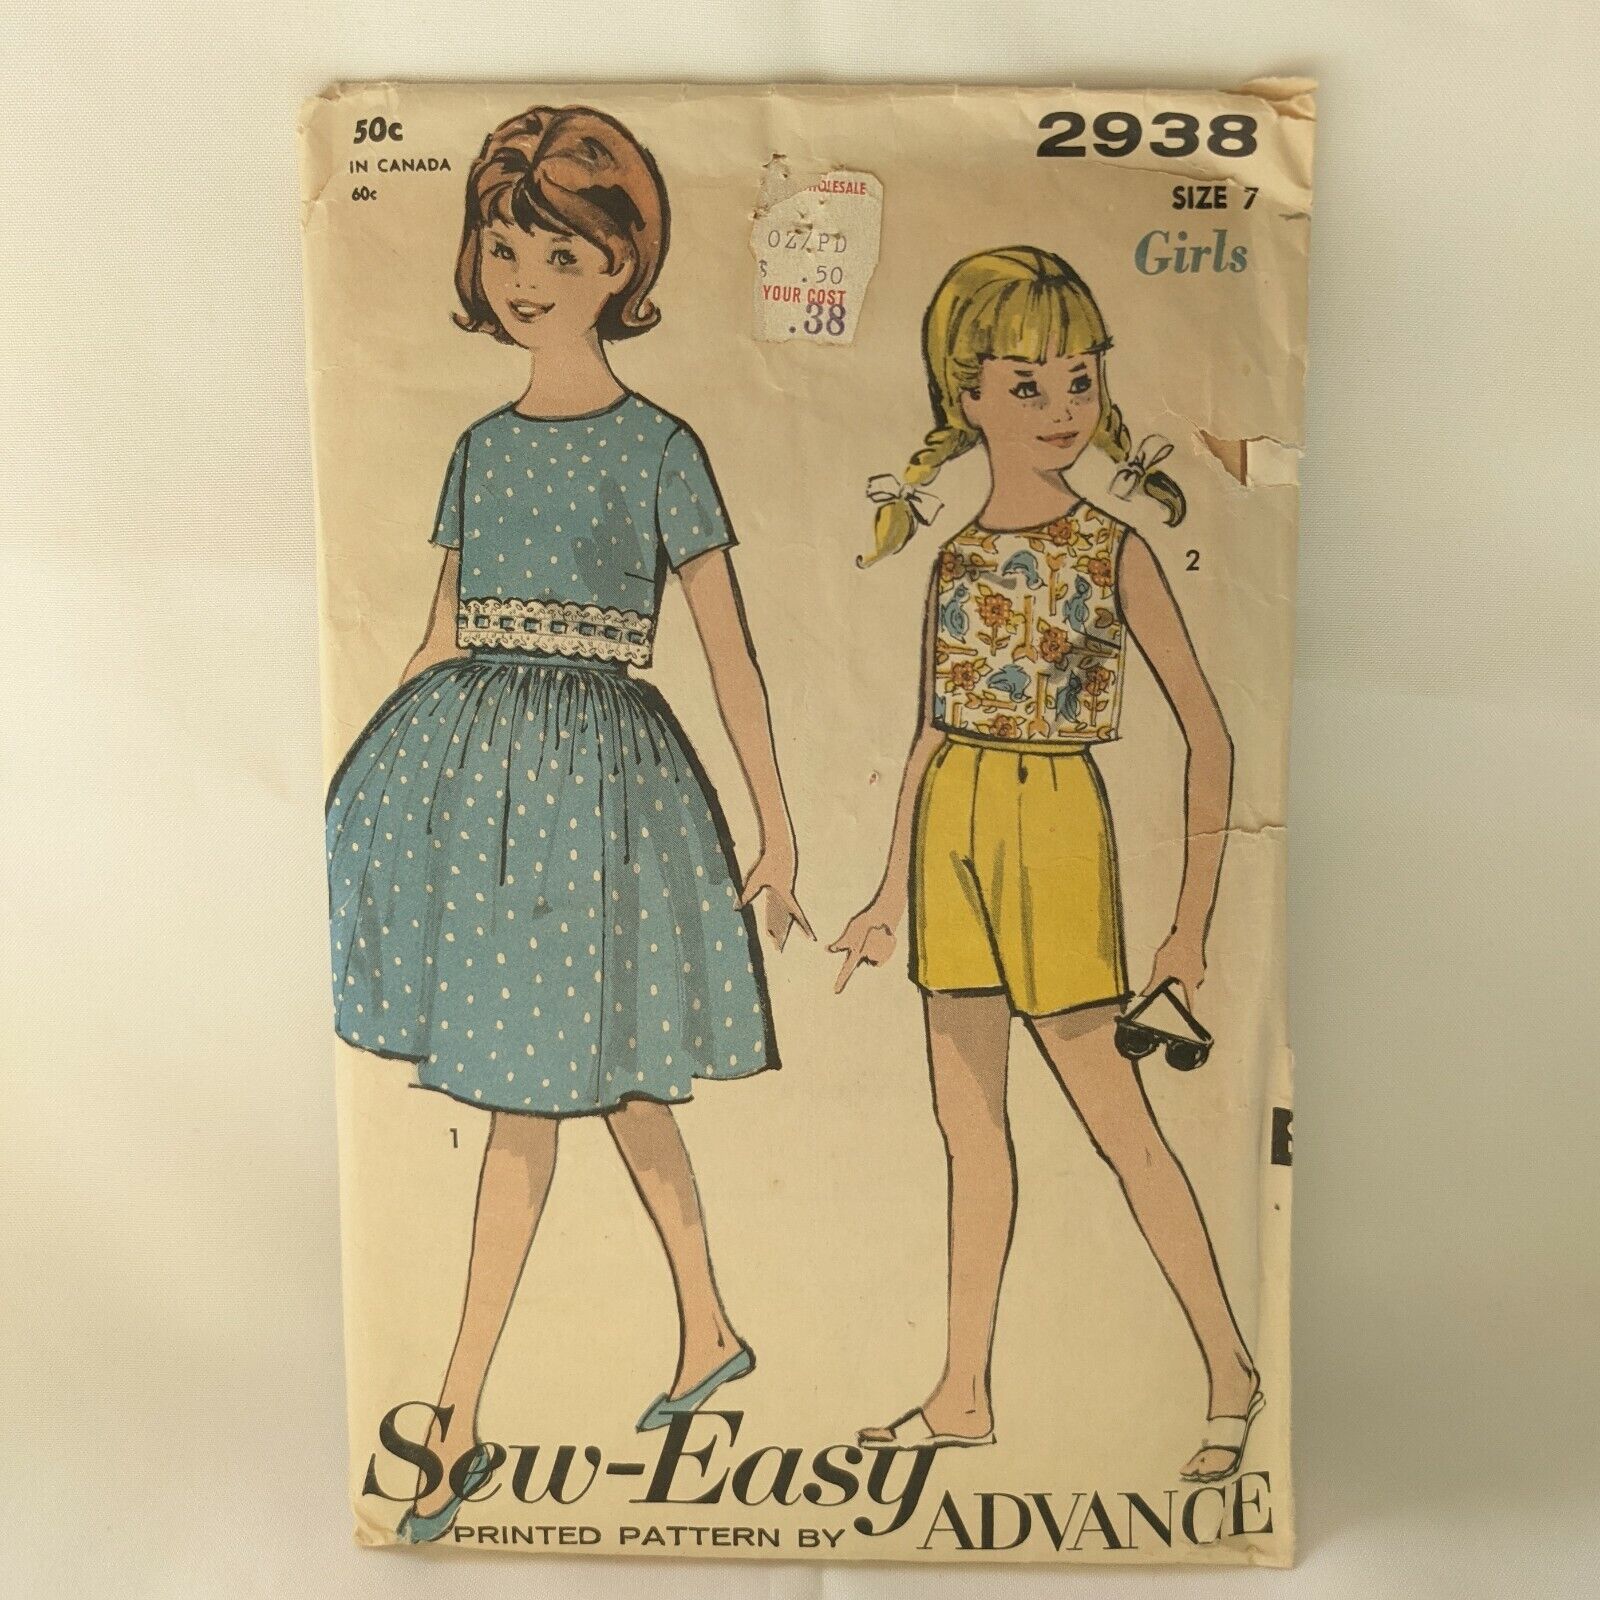 Vintage Simplicity Pattern 2938 Button Back Top Shorts Skirts Girls 7 CUT 1960s